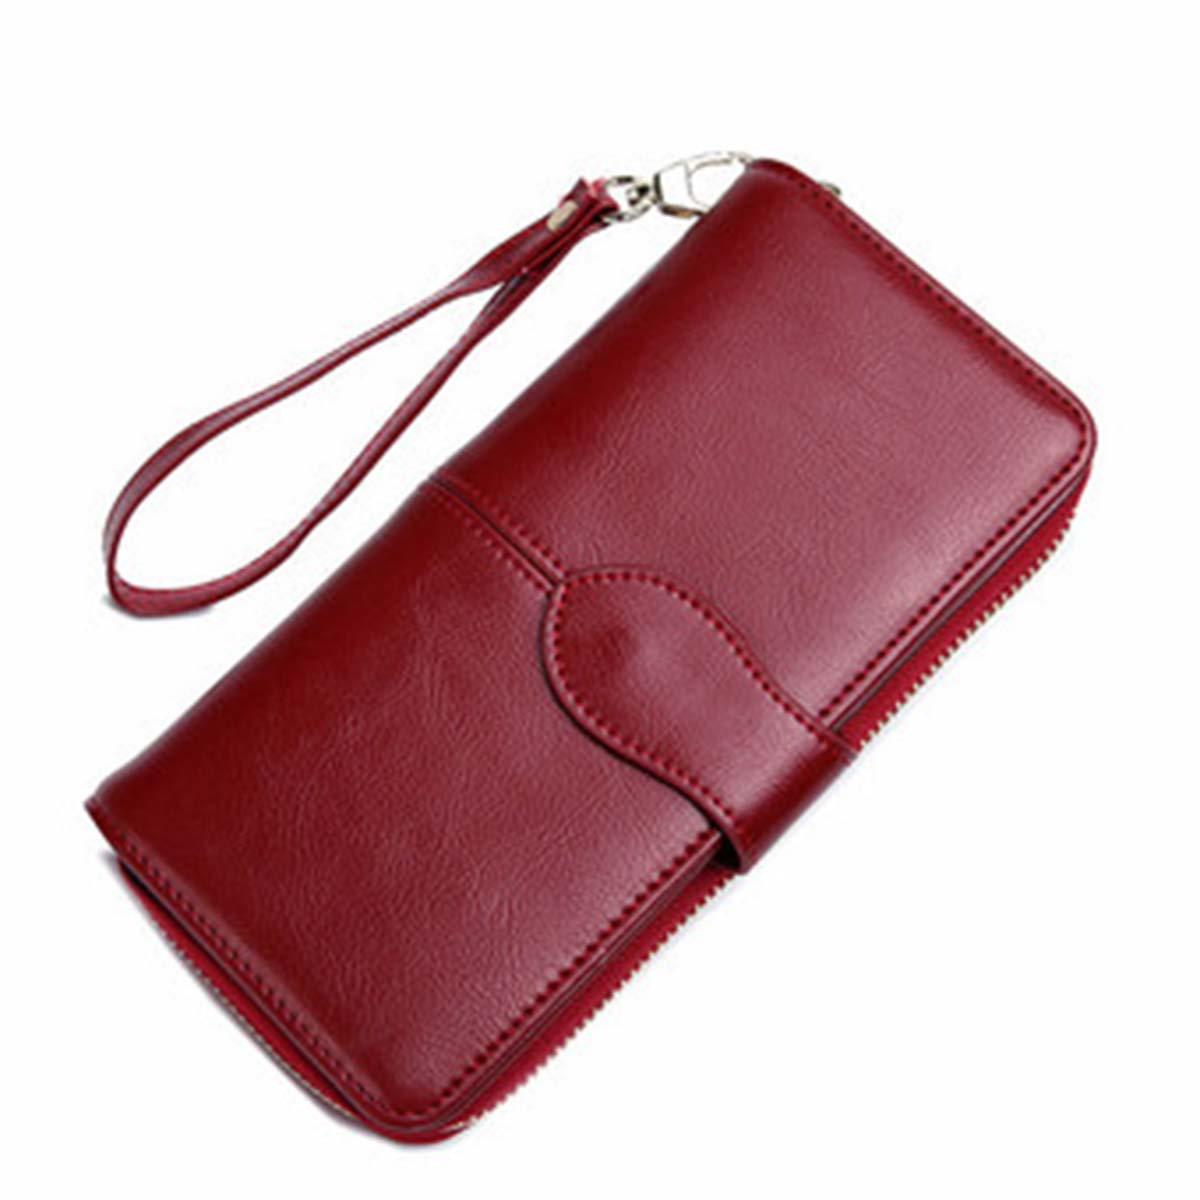 Women top grain genuine cow leather wallet real leather long model red intl 2866 5220706 1 product